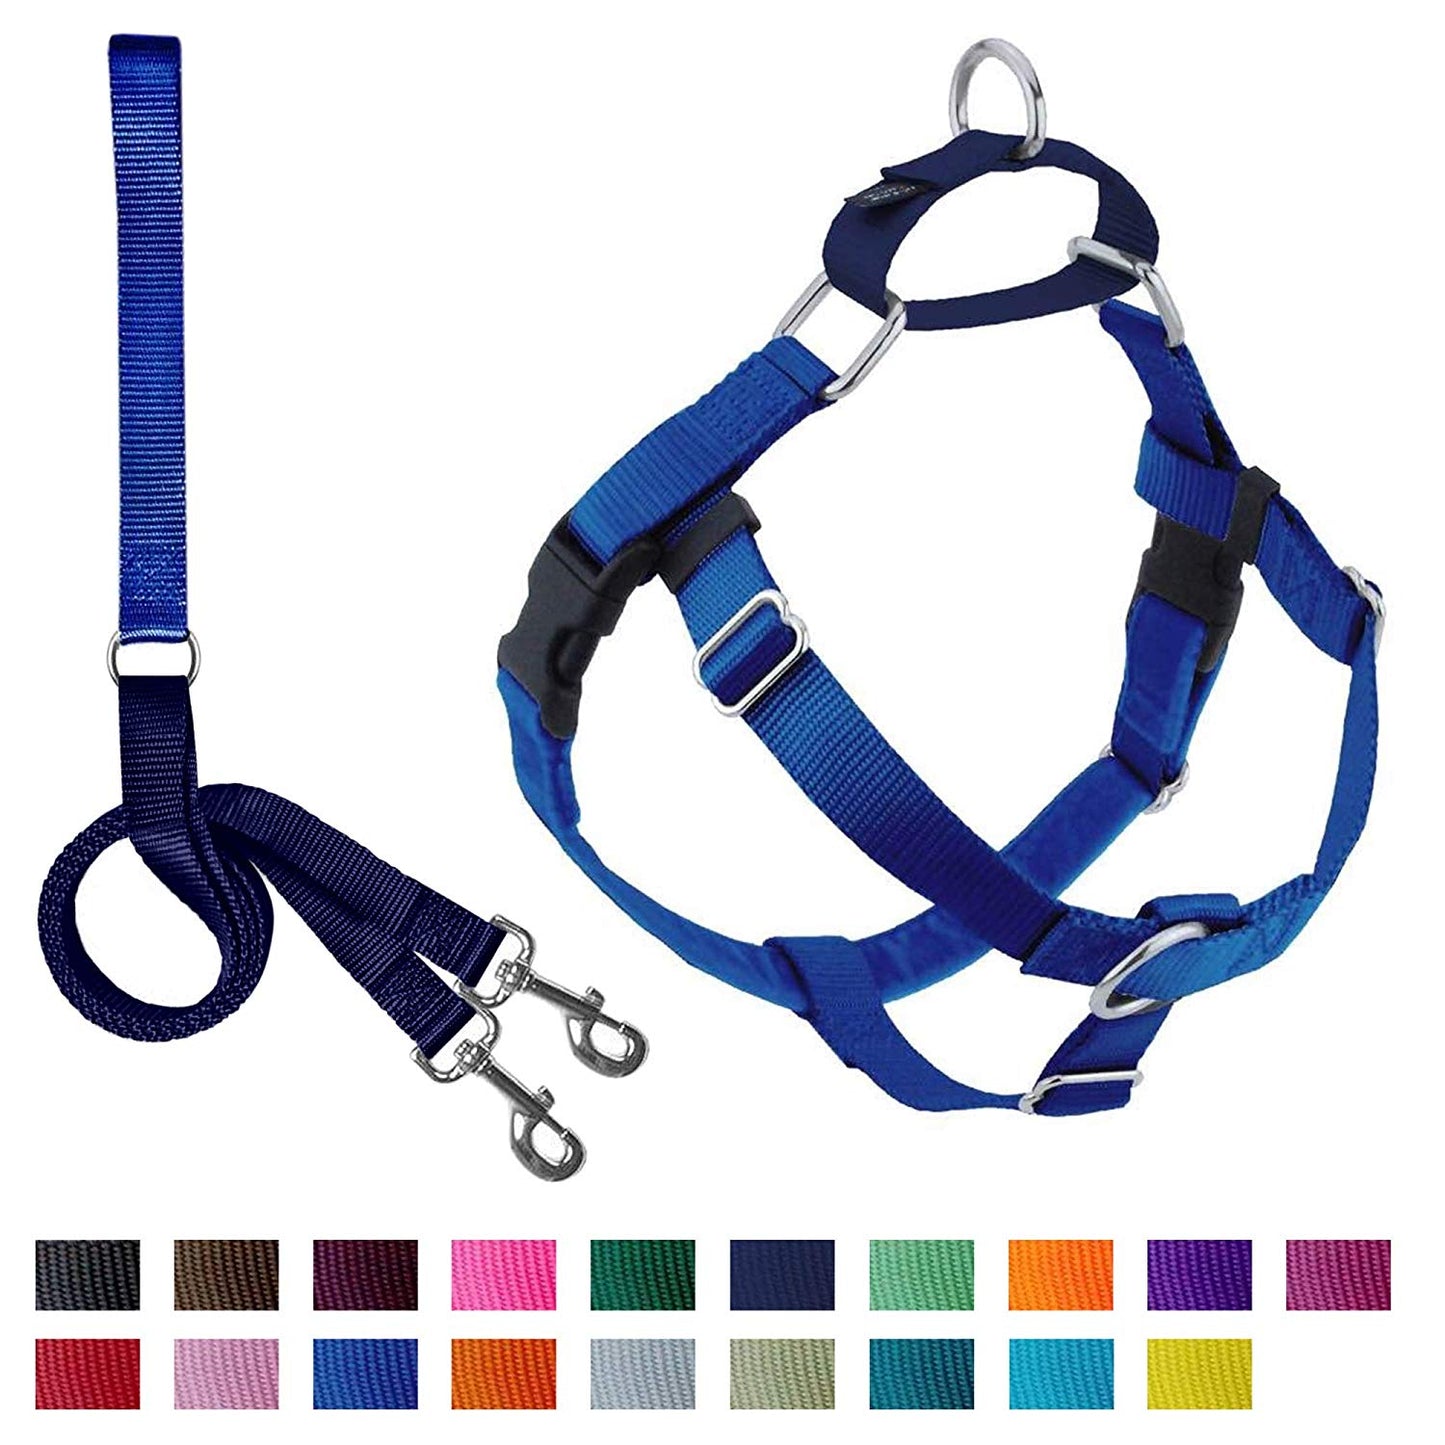 Freedom No-Pull Dog Harness Training Package, Small, Blue